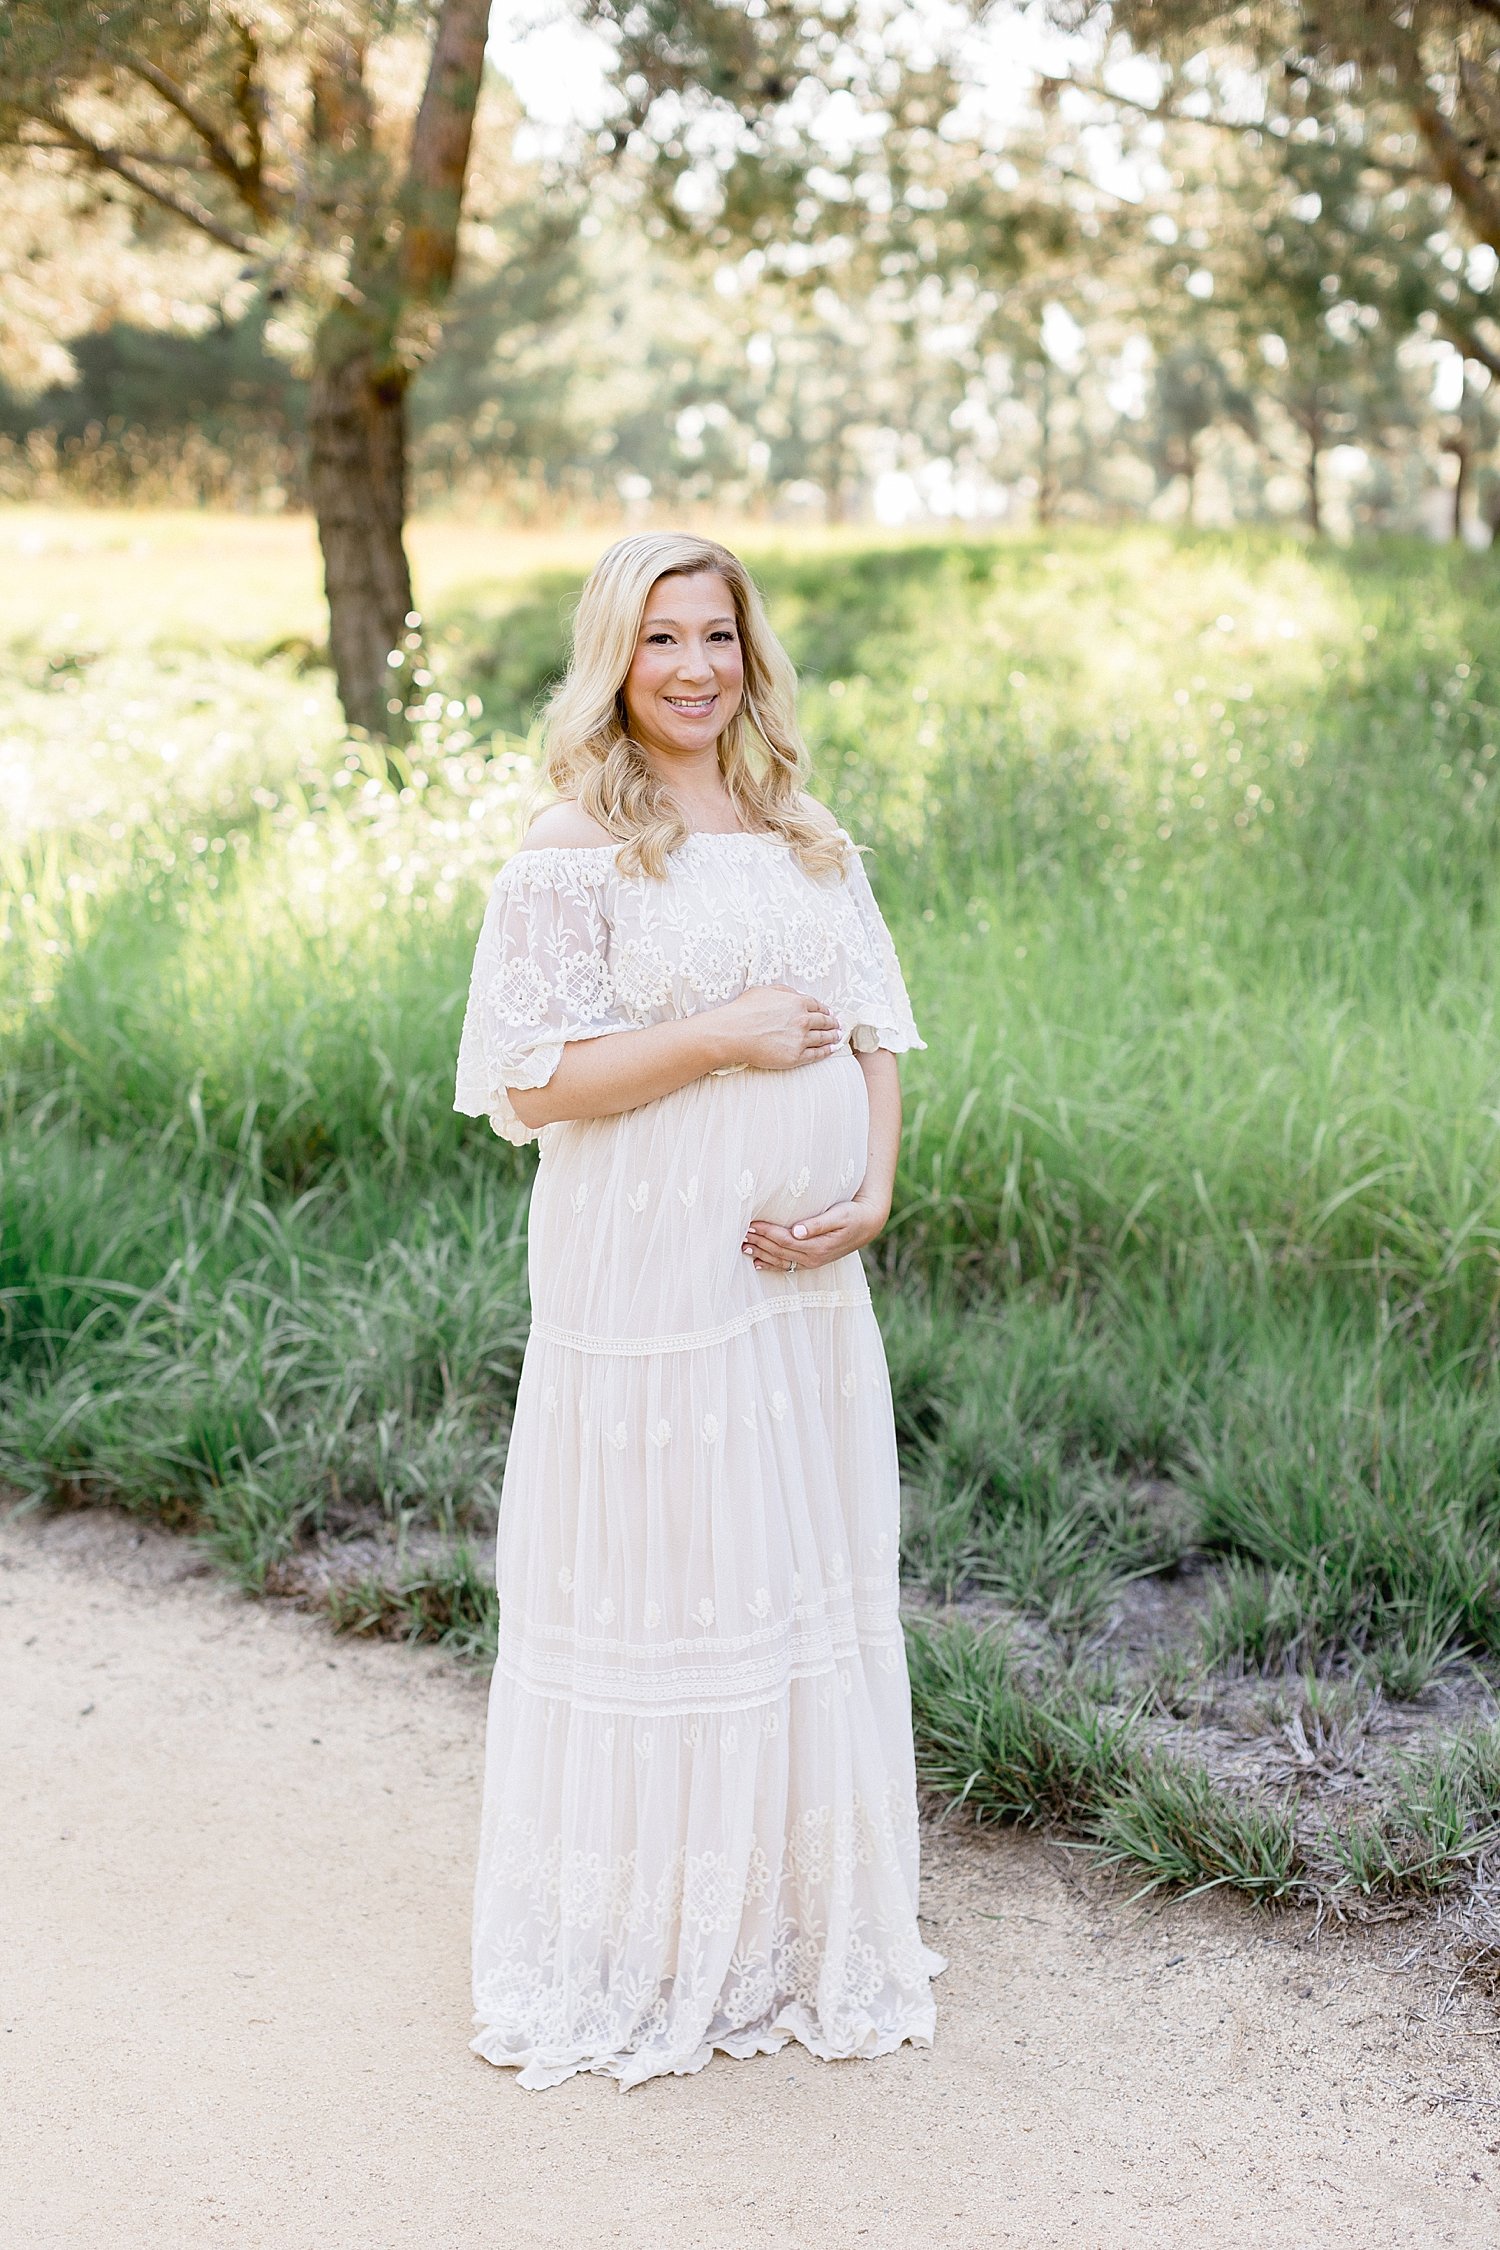 Expecting mom in lace dress | Ambre Williams Photography